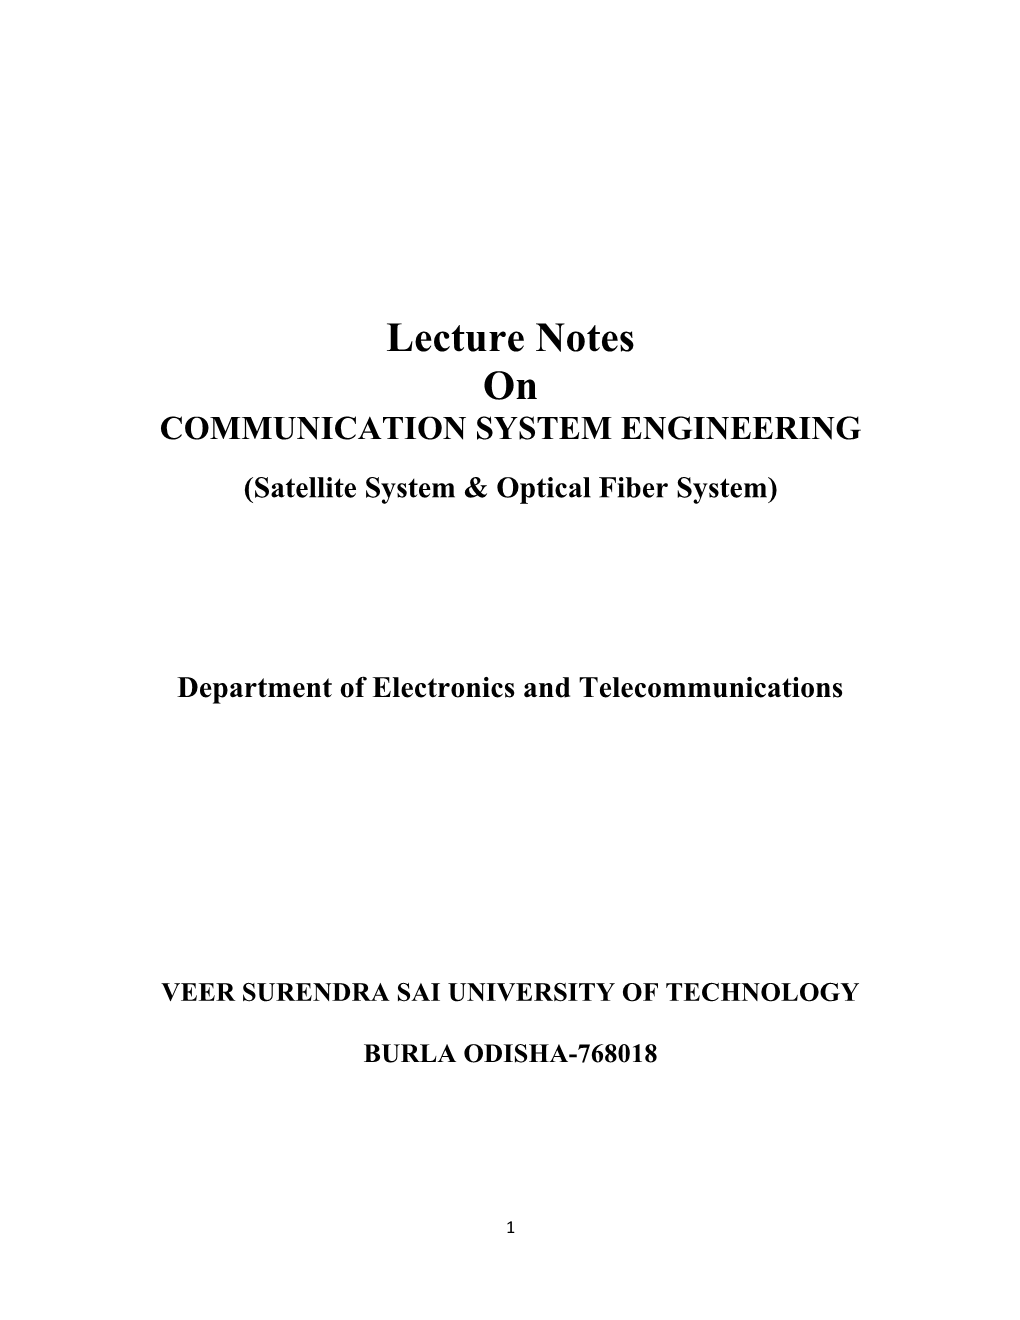 Lecture Notes on COMMUNICATION SYSTEM ENGINEERING (Satellite System & Optical Fiber System)